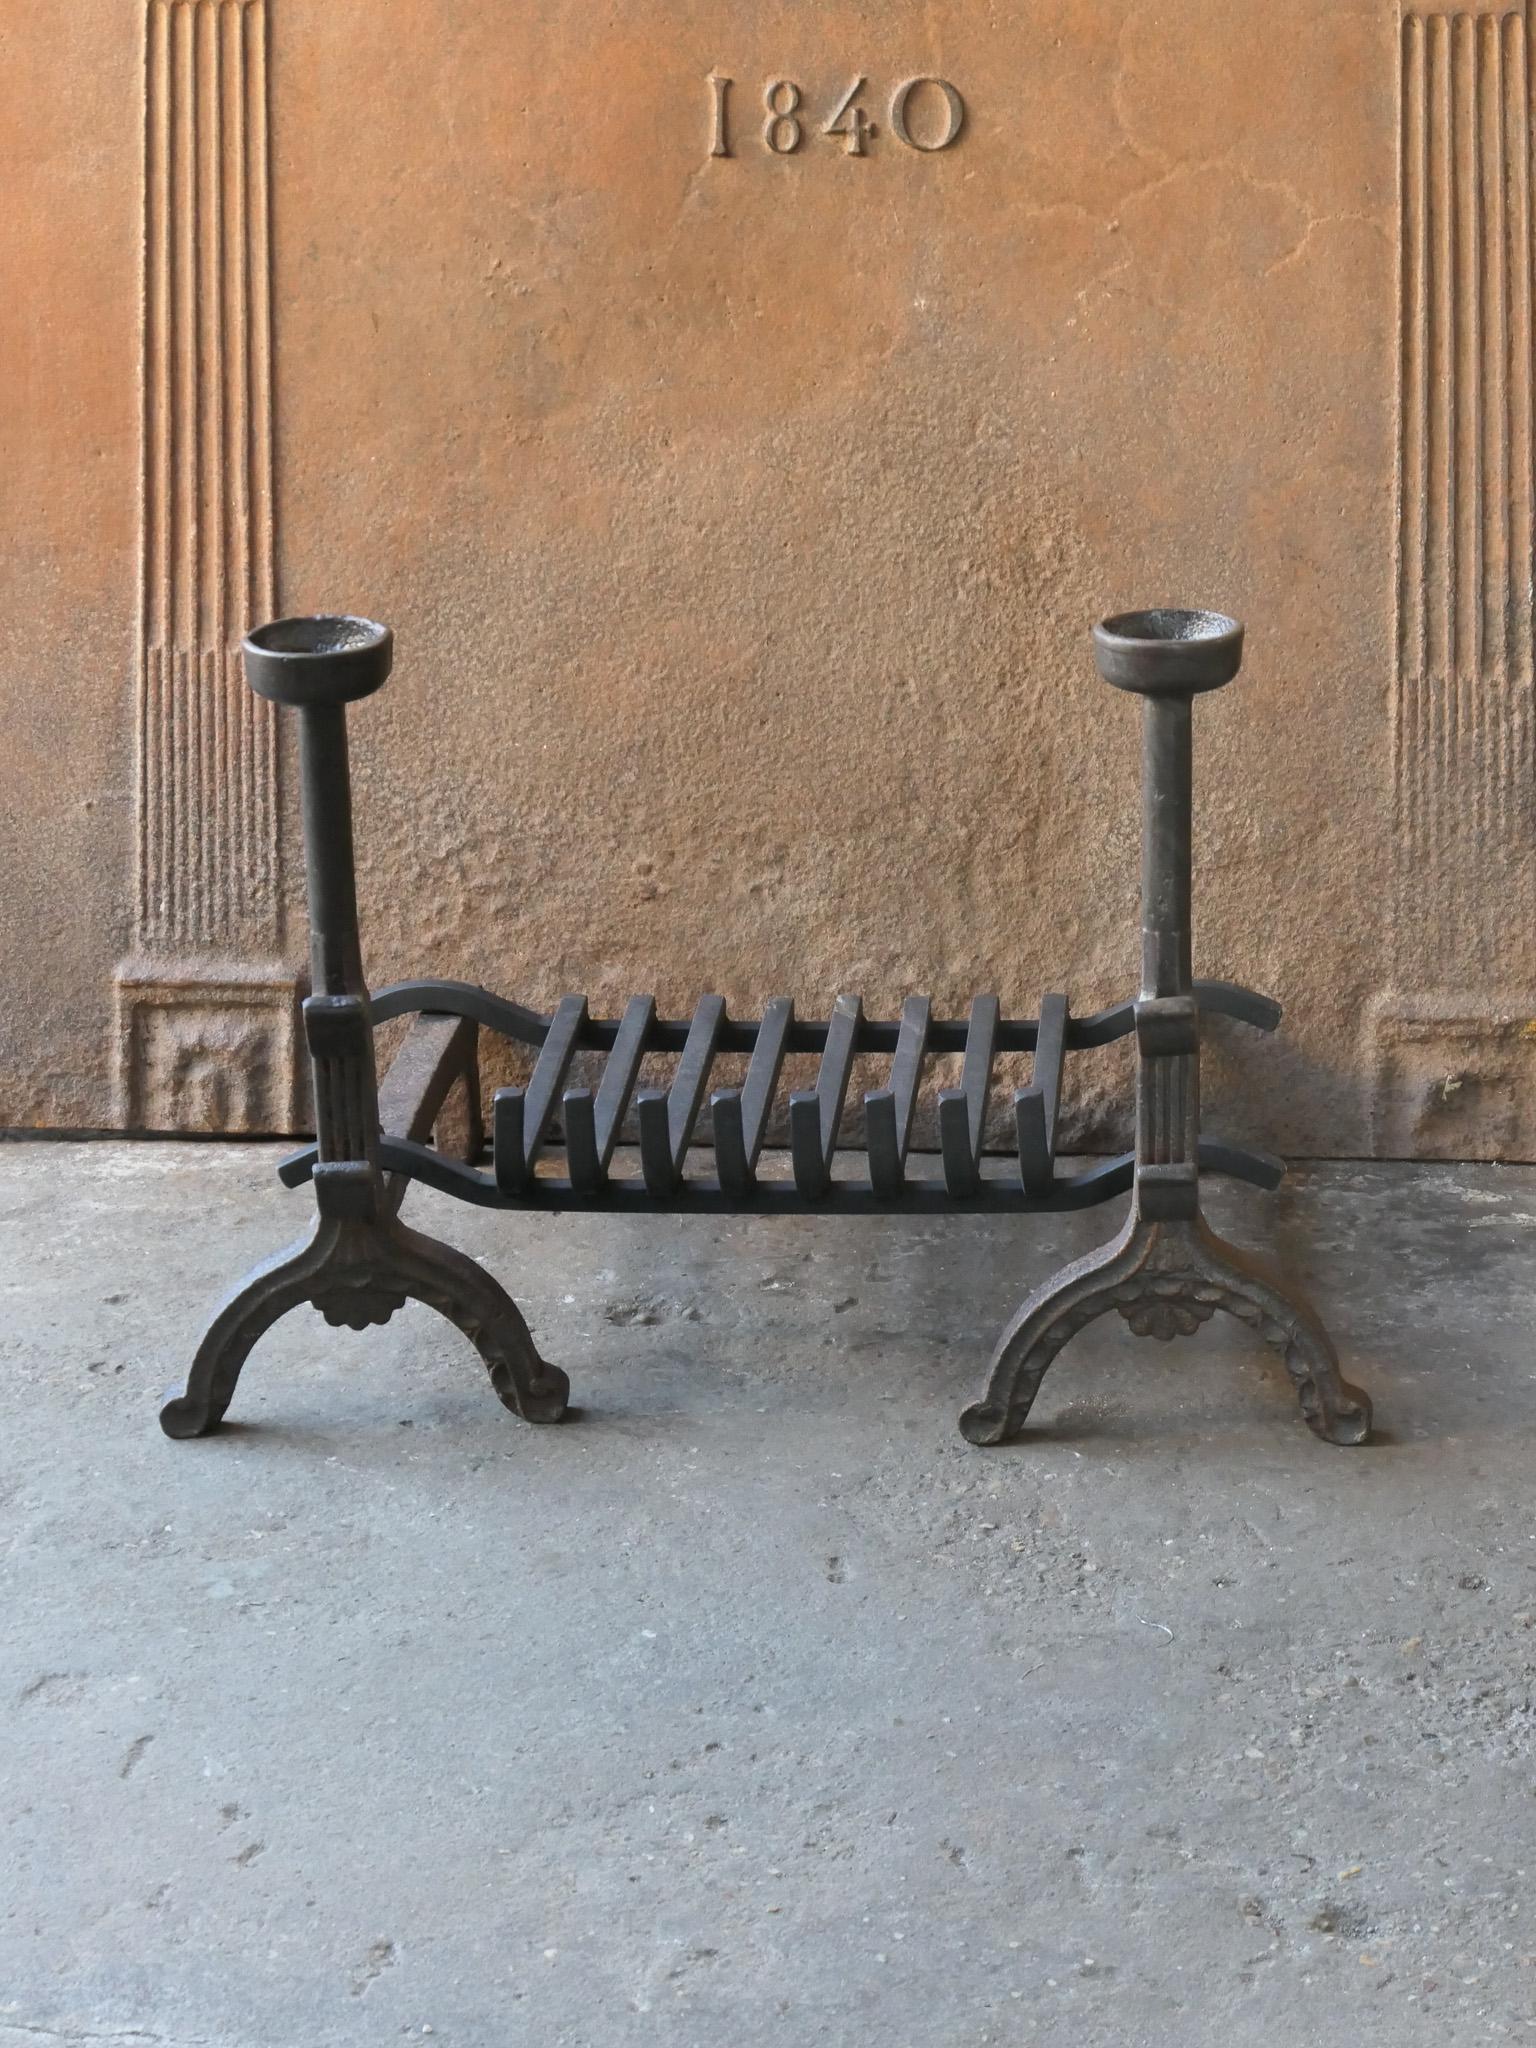 19th century French Napoleon III fireplace grate, made of cast iron and wrought iron. The basket is in a good condition and is fully functional.

Width at front is 64.5 cm (25.4 inches).